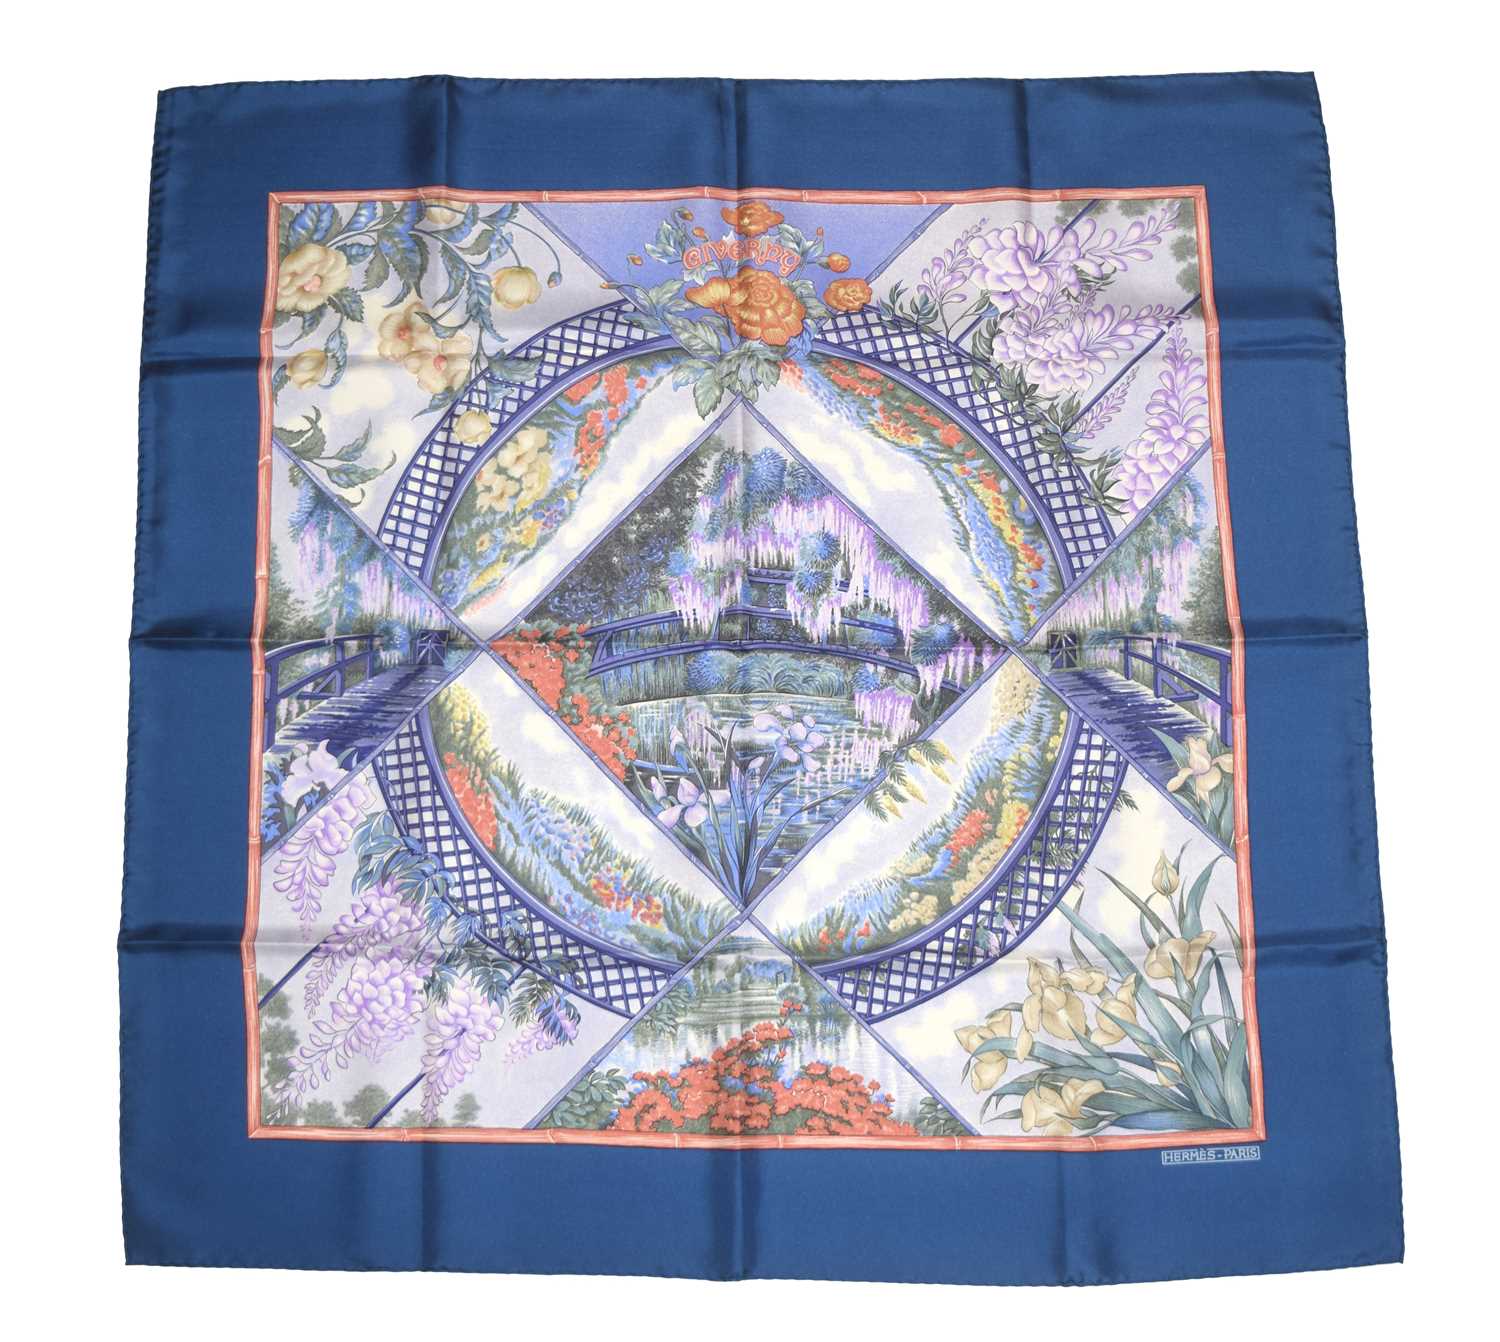 Lot 65 - A Hermès "Giverny" silk scarf by Laurence Bourthoumieux